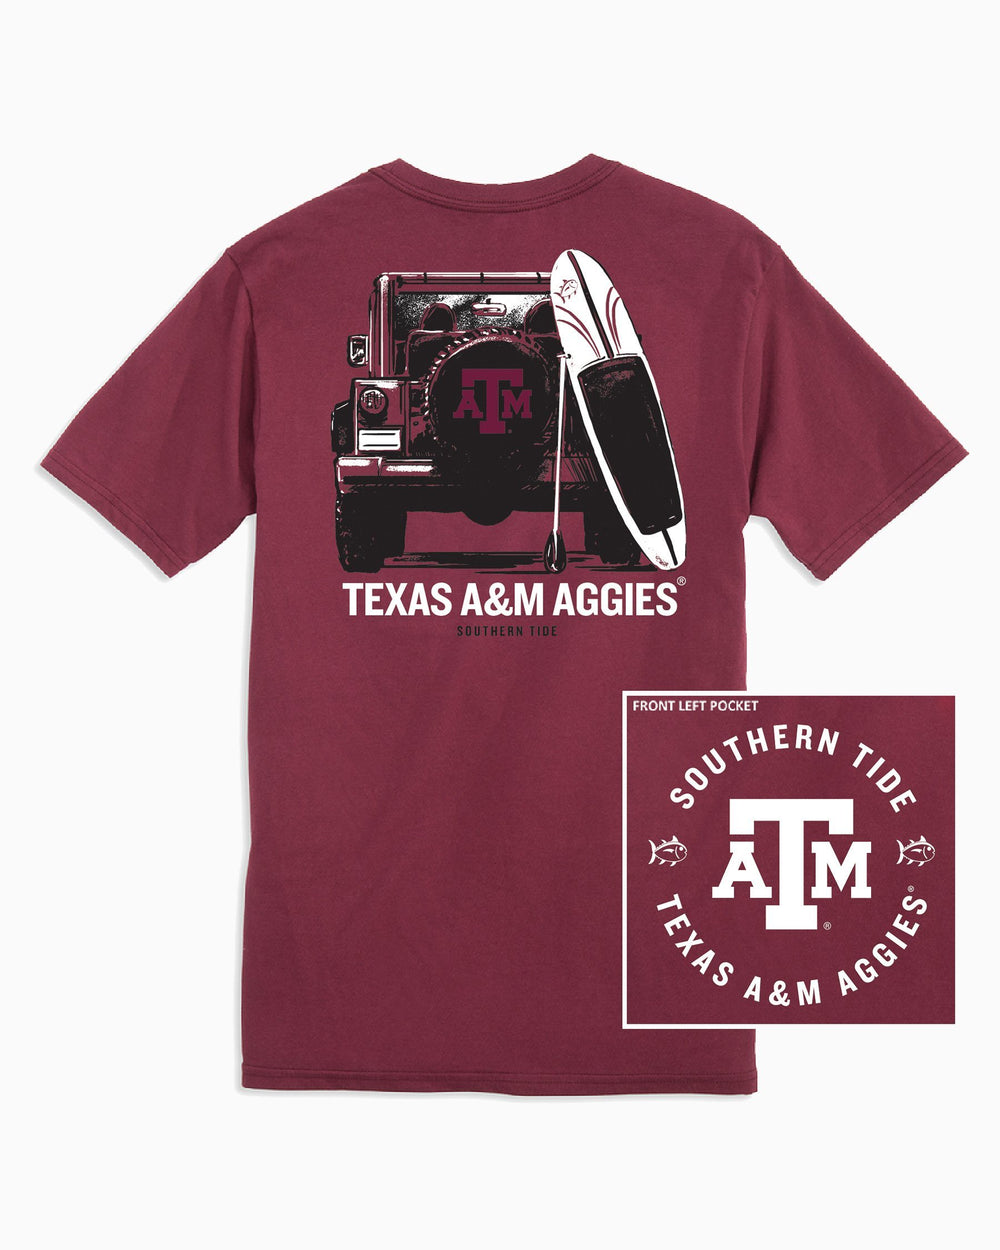 The back of the Men's Texas A&M Aggies Road Trip Short Sleeve T-Shirt by Southern Tide - Chianti